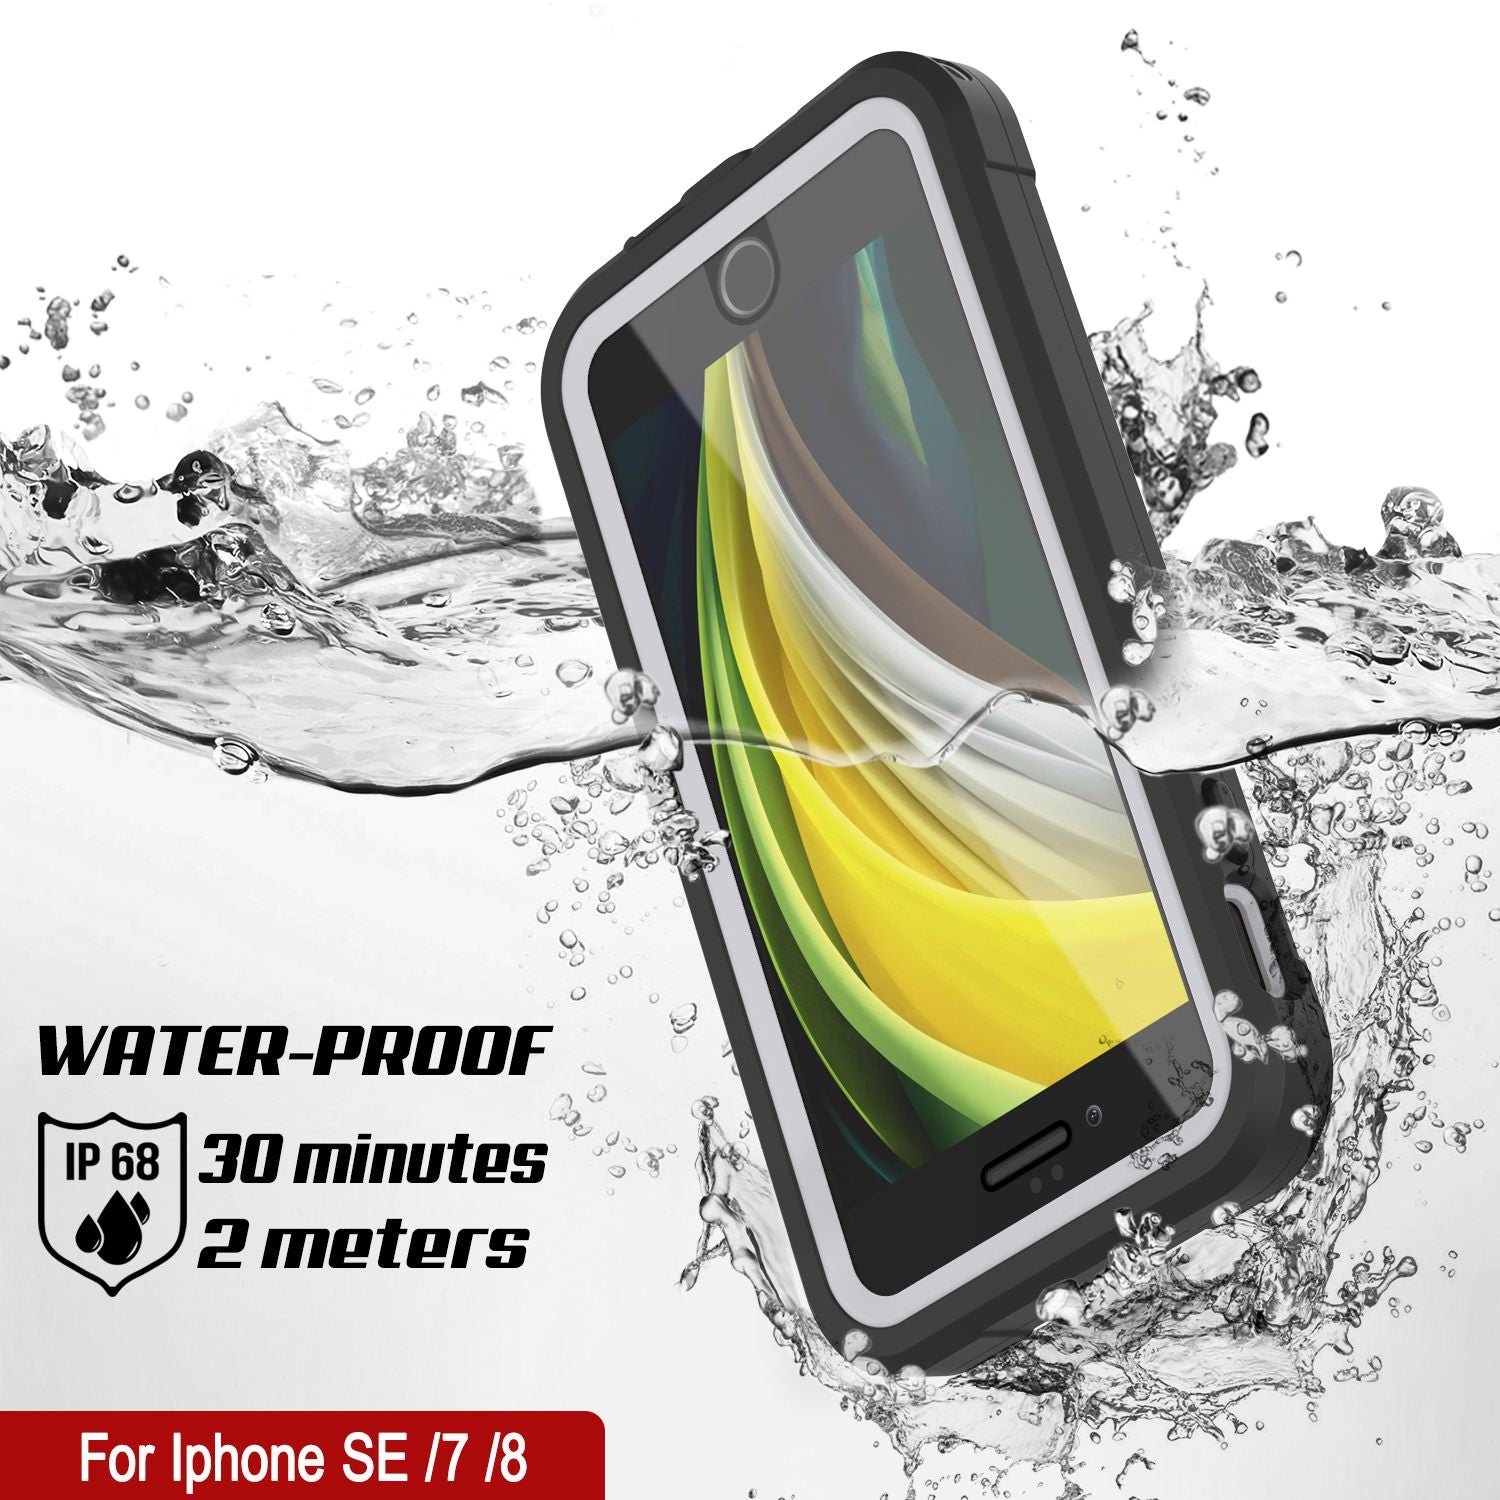 iPhone 8 Waterproof IP68 Case, Punkcase [white]  [Maximus Series] [Slim Fit] [IP68 Certified] [Shockresistant] Clear Armor Cover with Screen Protector | Ultimate Protection